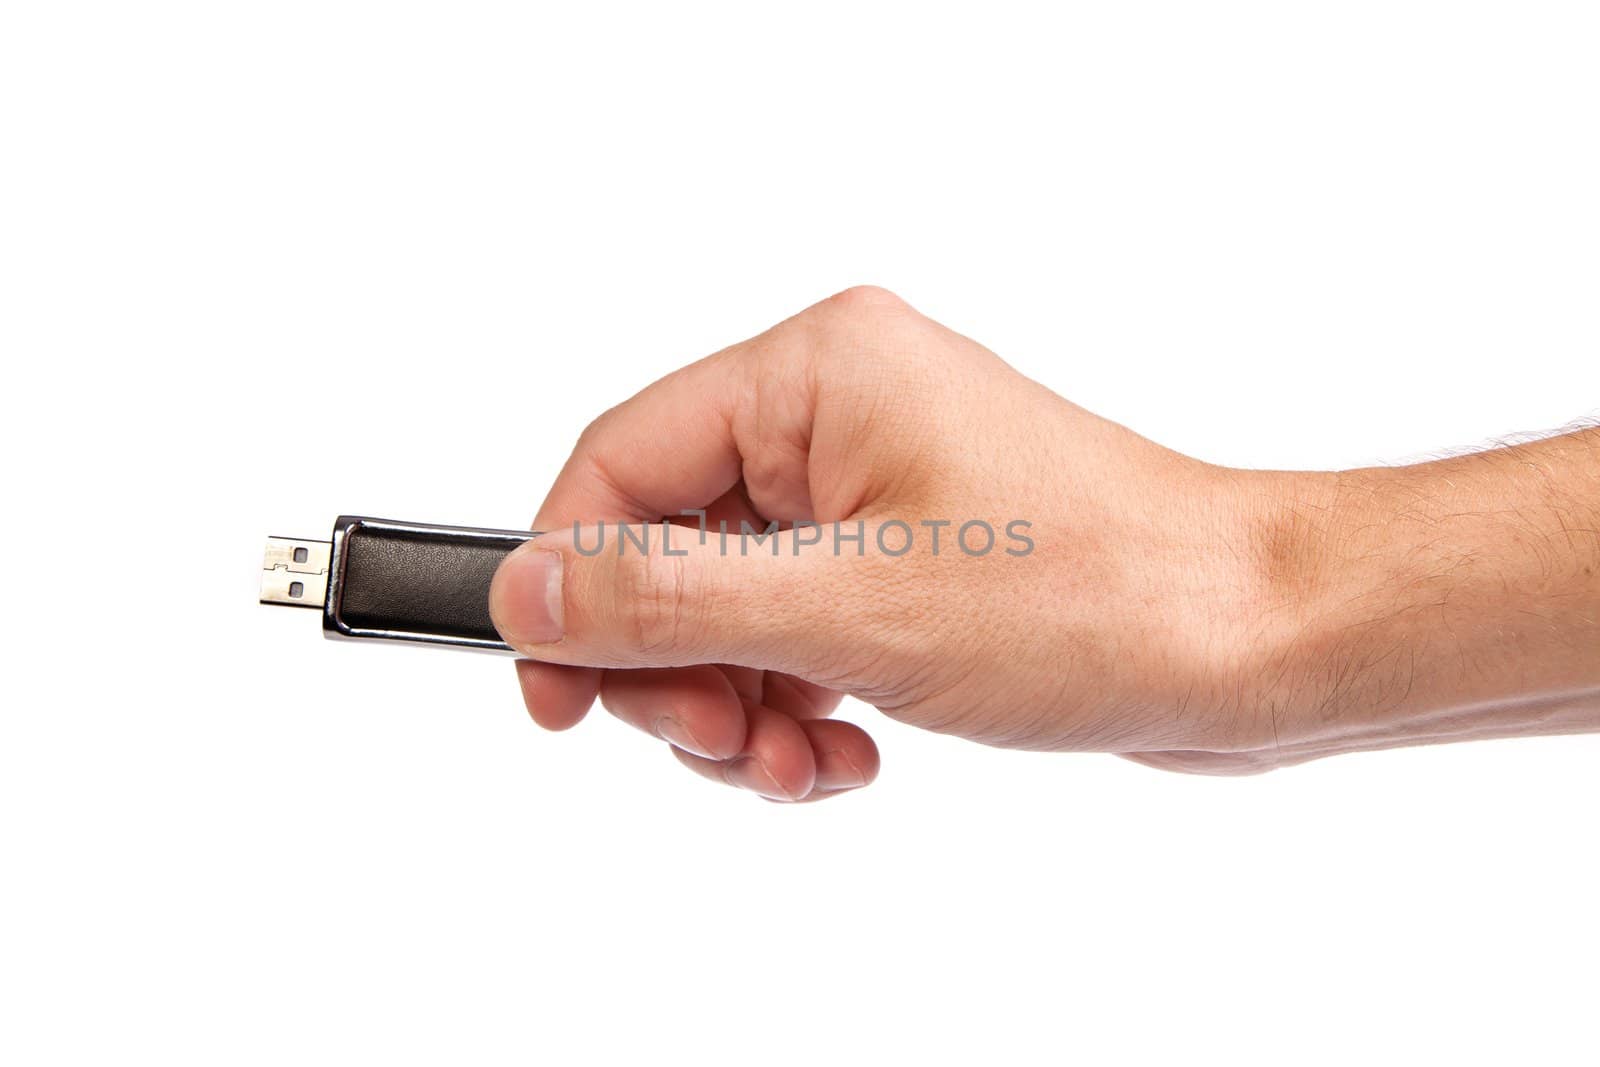 Closeup image: hand holding black USB data storage or connecting computer device with USB cable, isolated on white background